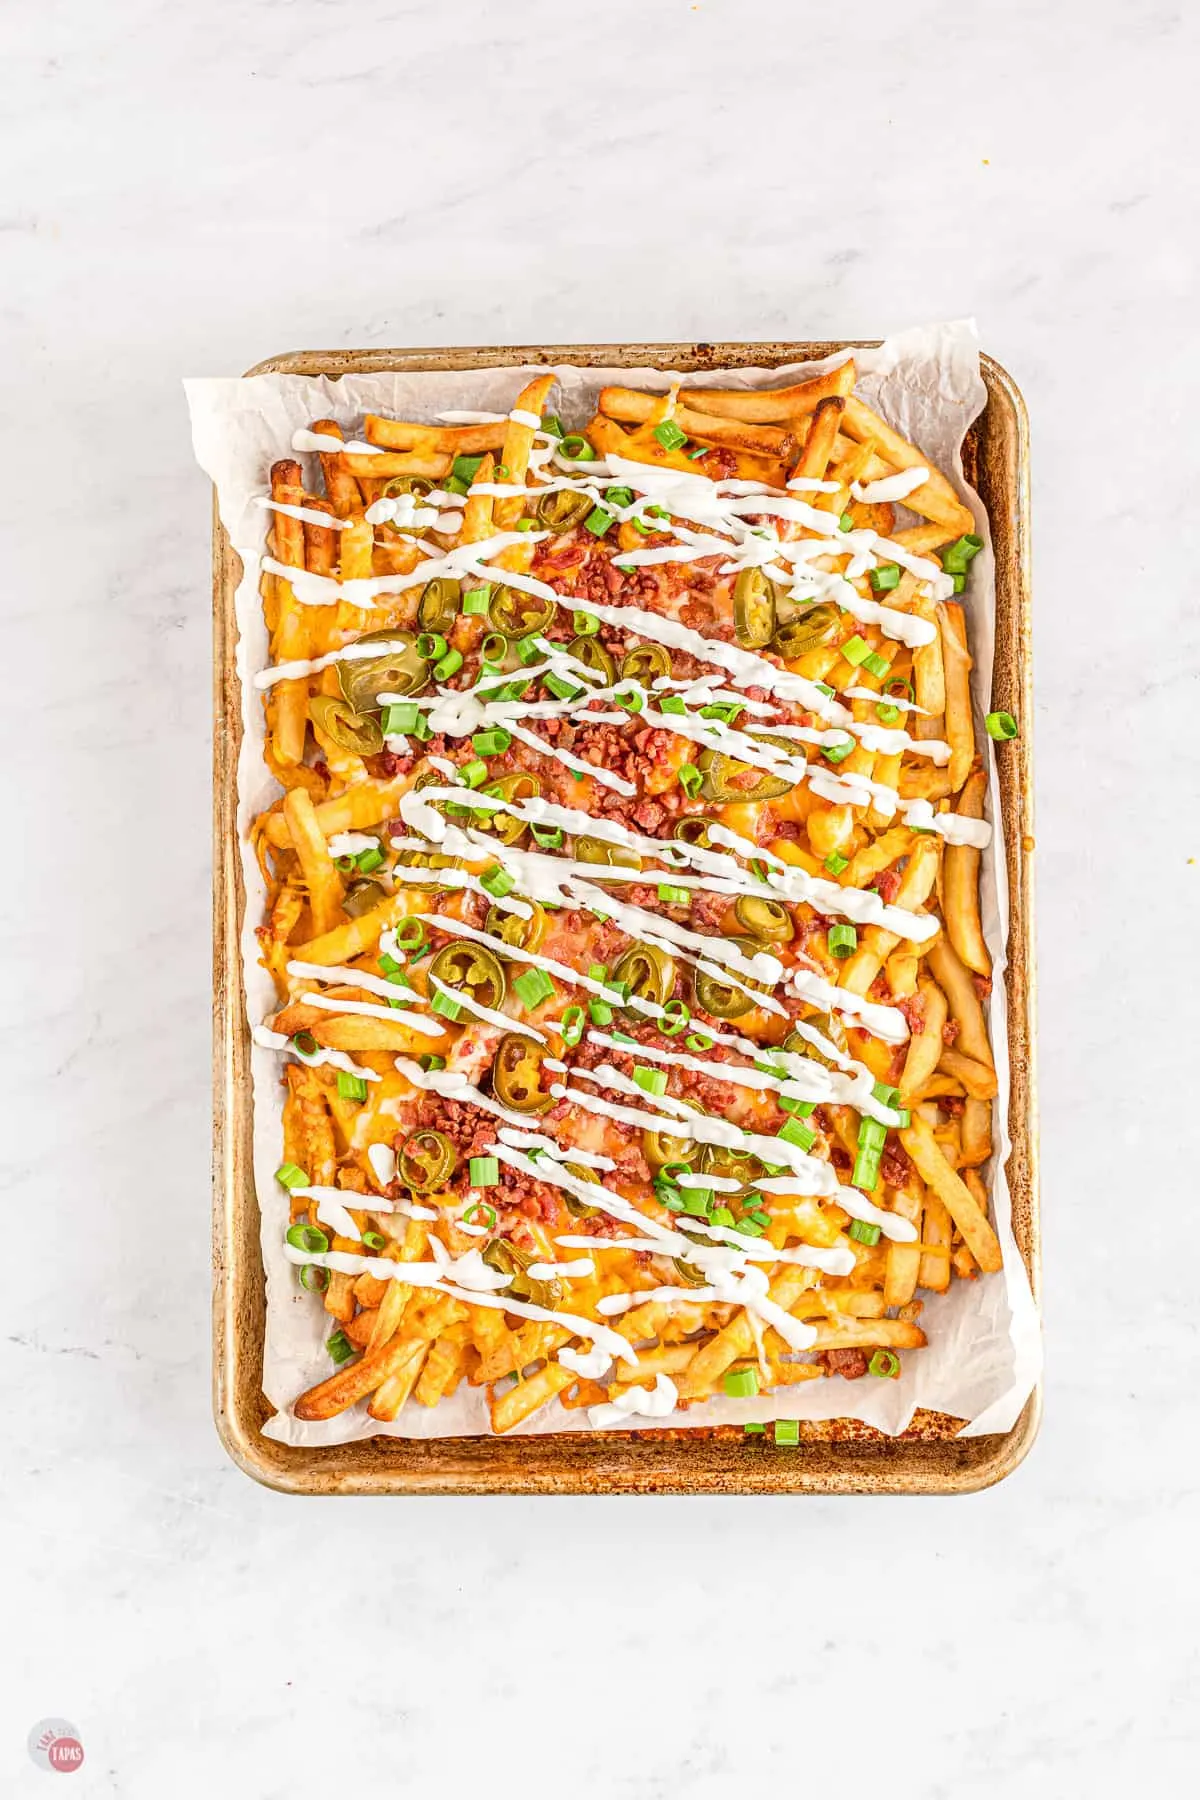 A baking tray lined with parchment paper filled with baked french fries topped with shredded cheese, bacon crumbles, sliced jalapeños, chopped green onion, and drizzled in sour cream.